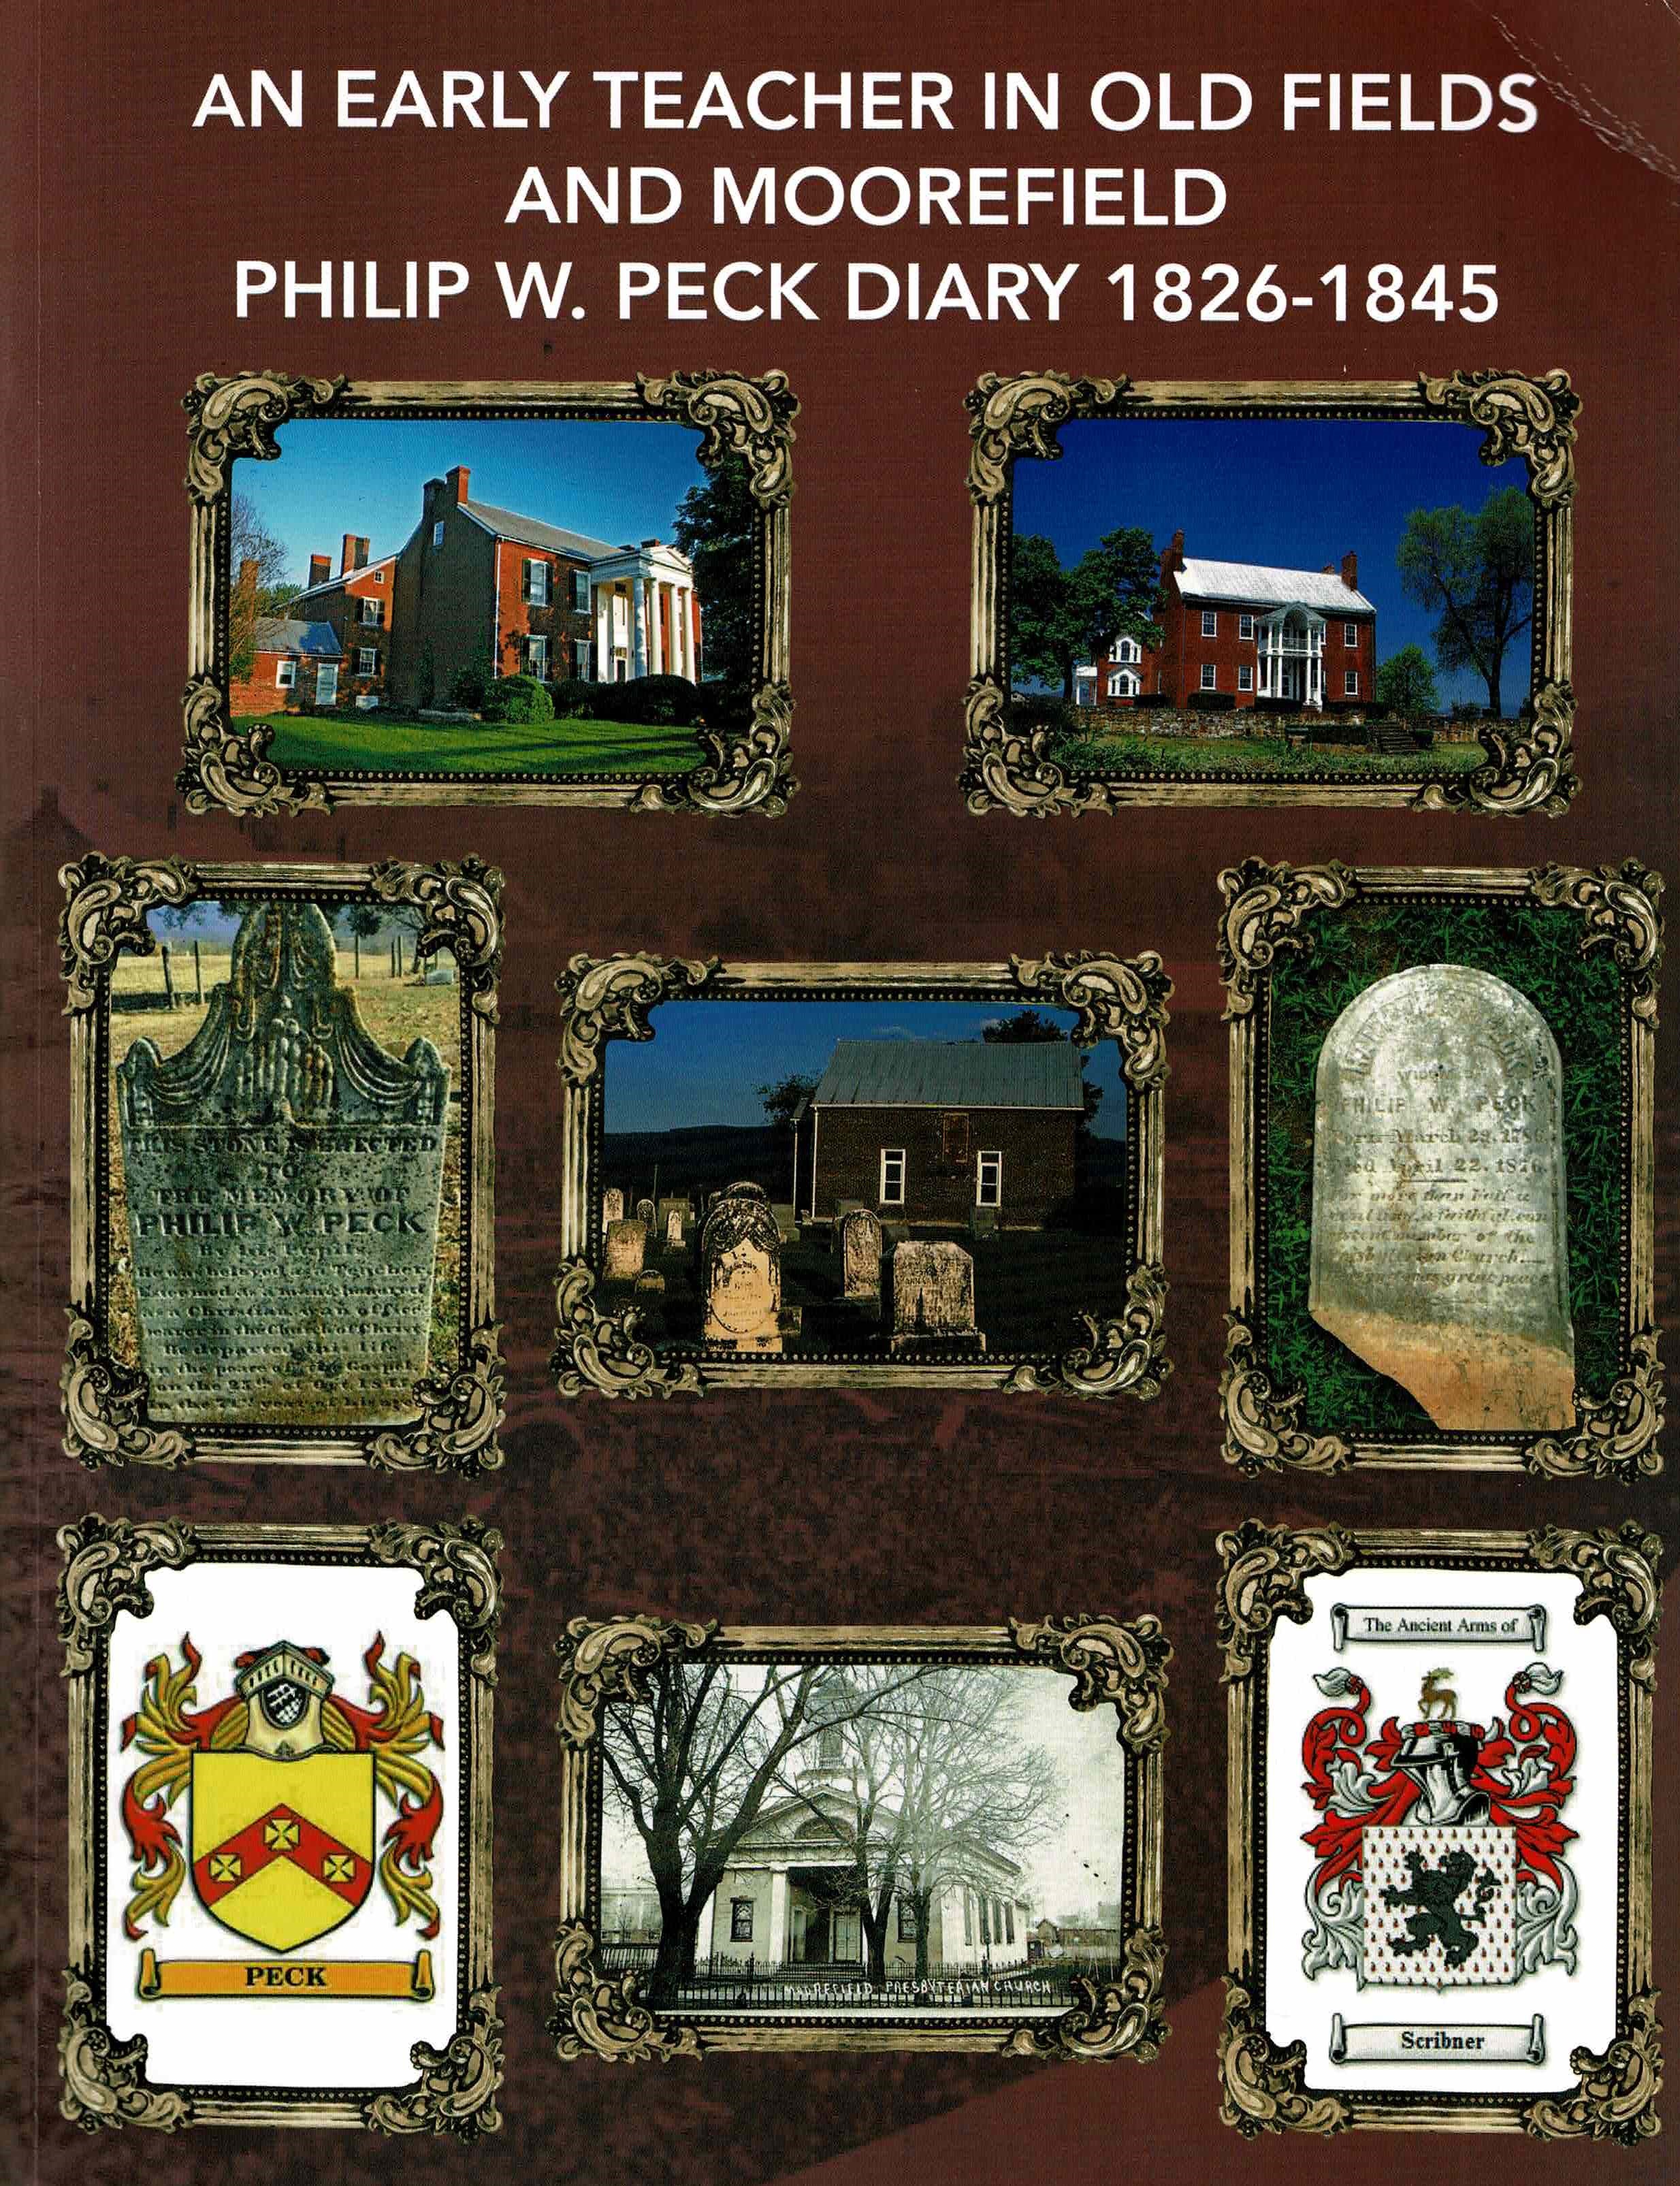 An Early Teacher in Old Fields and Moorefield -- Philip W. Peck Diary 1826-1845